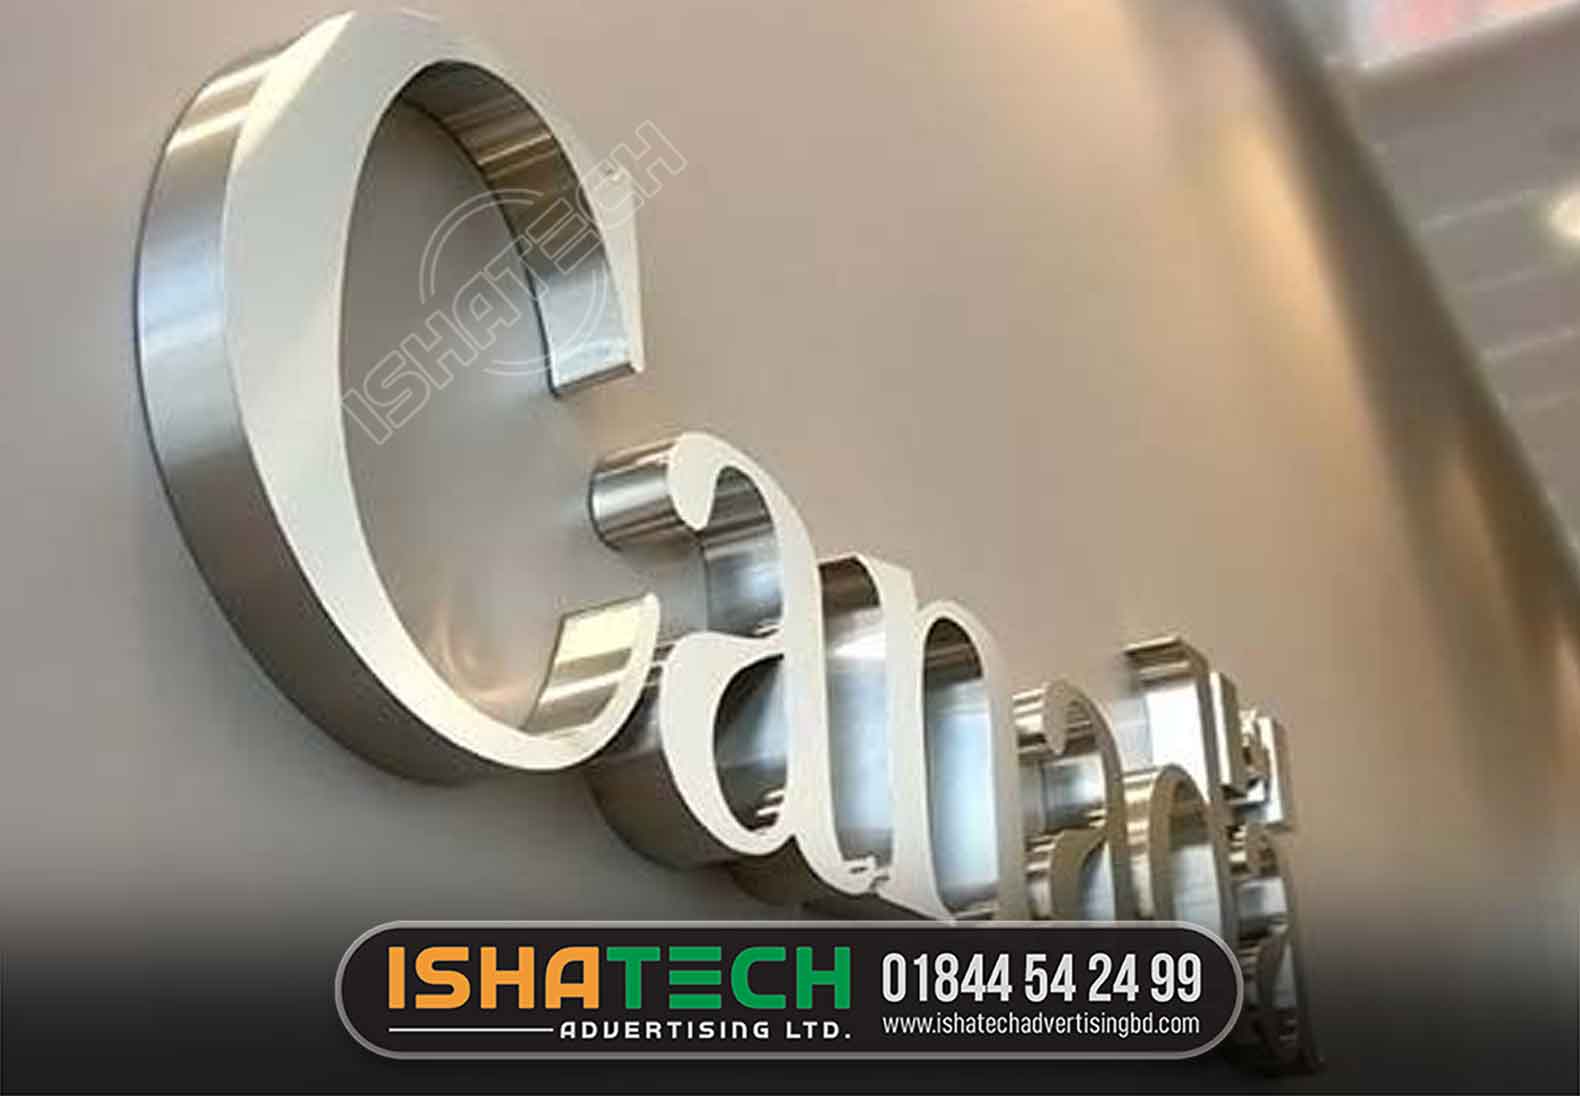 CANADIAN SS METAL LETTER SIGNAGE FACTORY IN DHAKA BANGLADESH